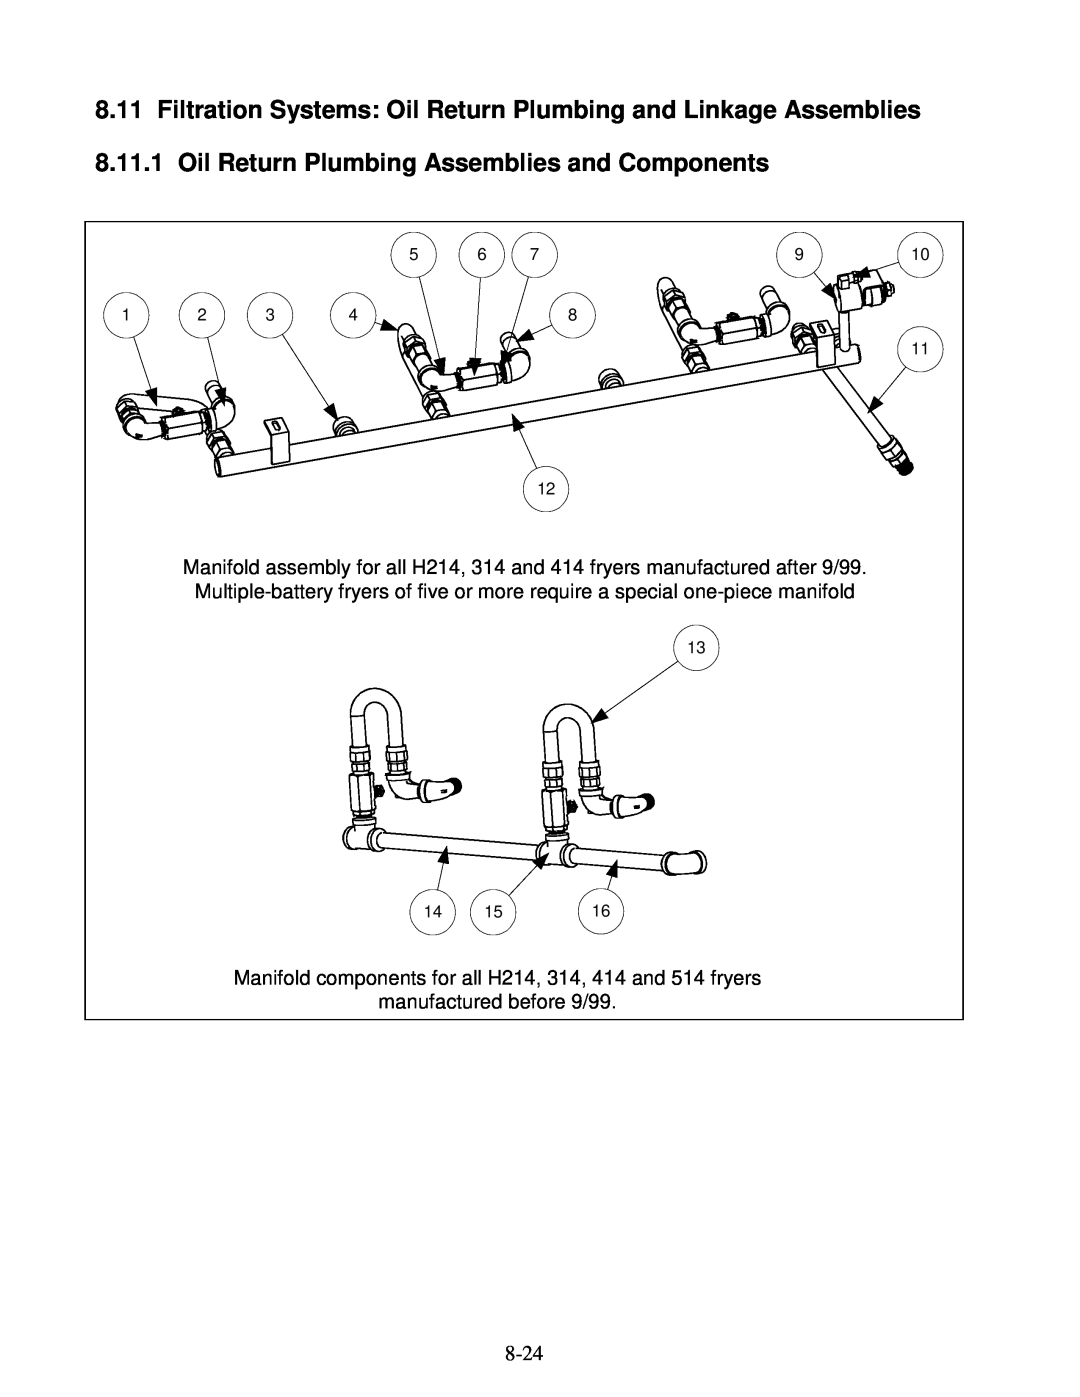 Frymaster H14 Series service manual Manifold components for all H214, 314, 414 and 514 fryers, manufactured before 9/99 